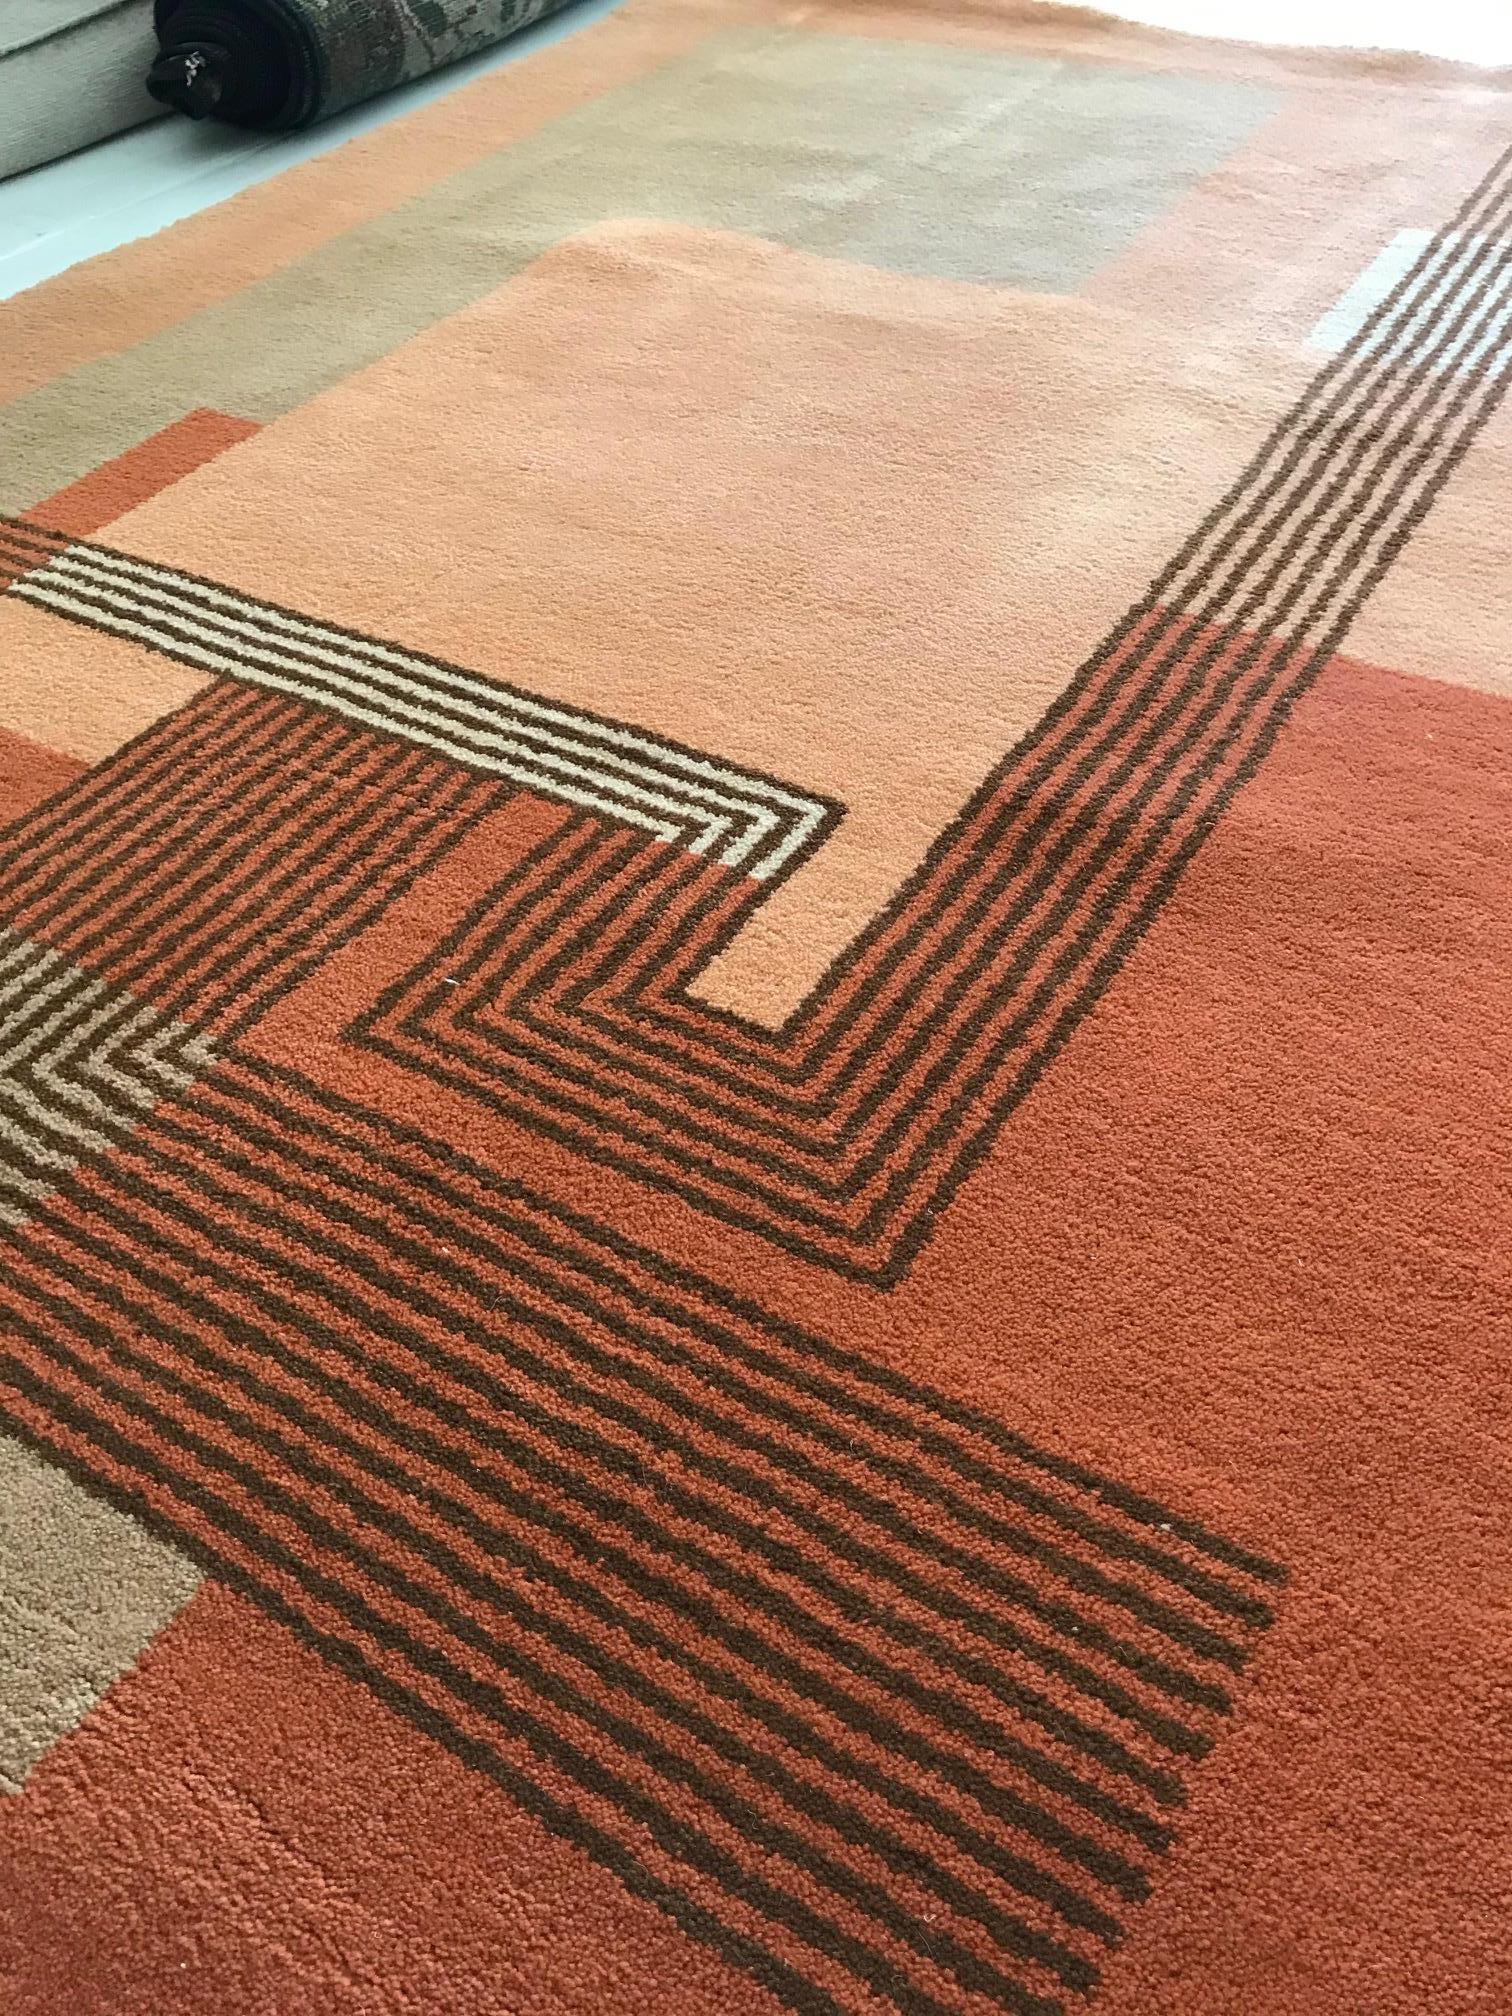 Authentic French Art Deco orange handmade wool rug
What makes Art Deco rugs so special in the eyes of art collectors and interior designers is undoubtedly a great diversity of their styles. You can easily find an Art Deco rug that will perfectly